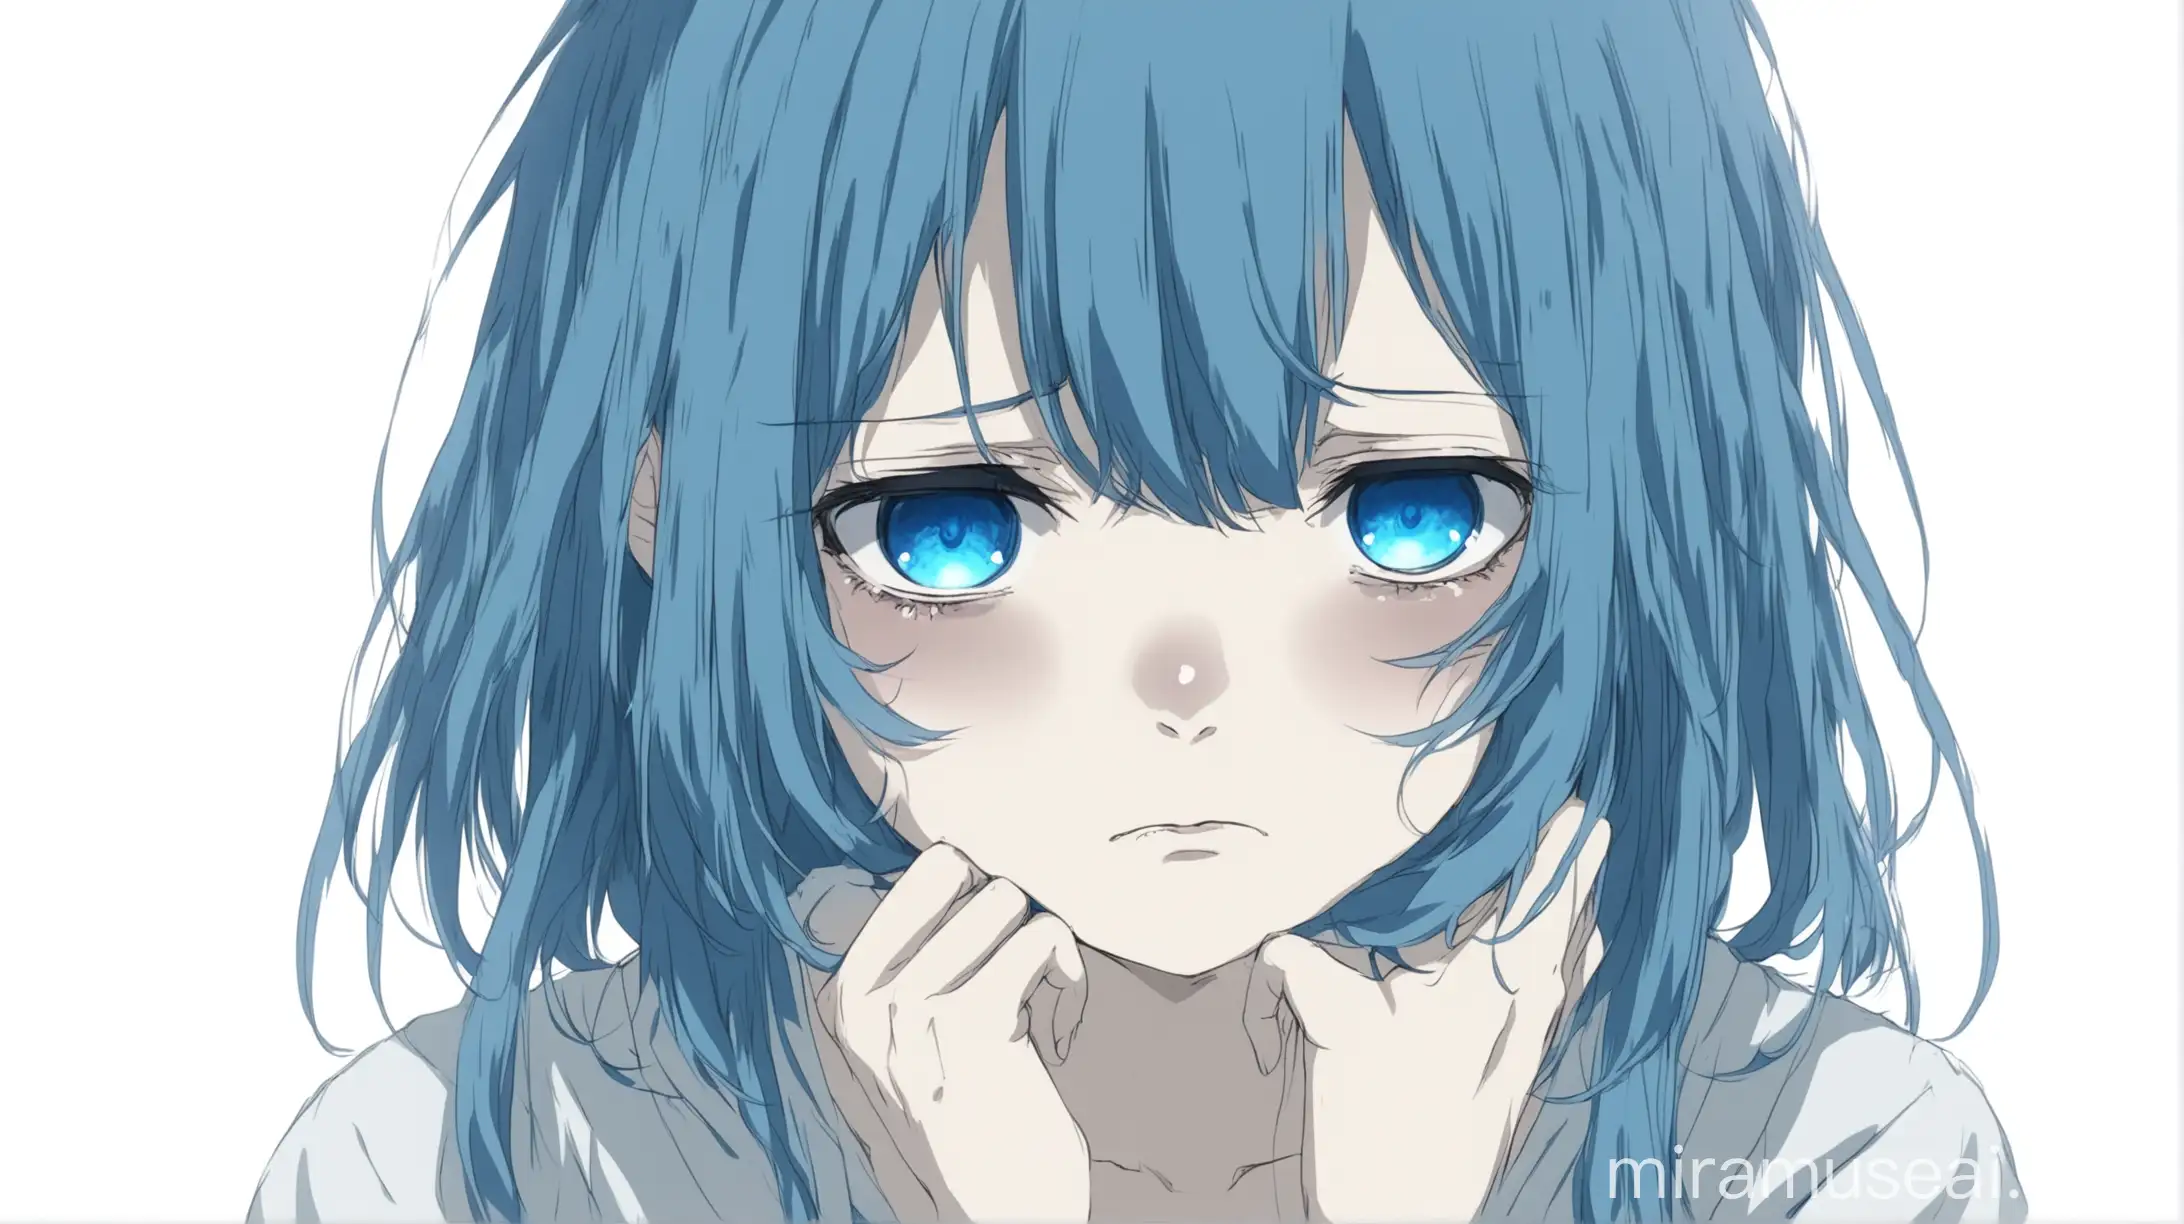 Anime Girl with Blue Hair in a Melancholic Pose on White Background